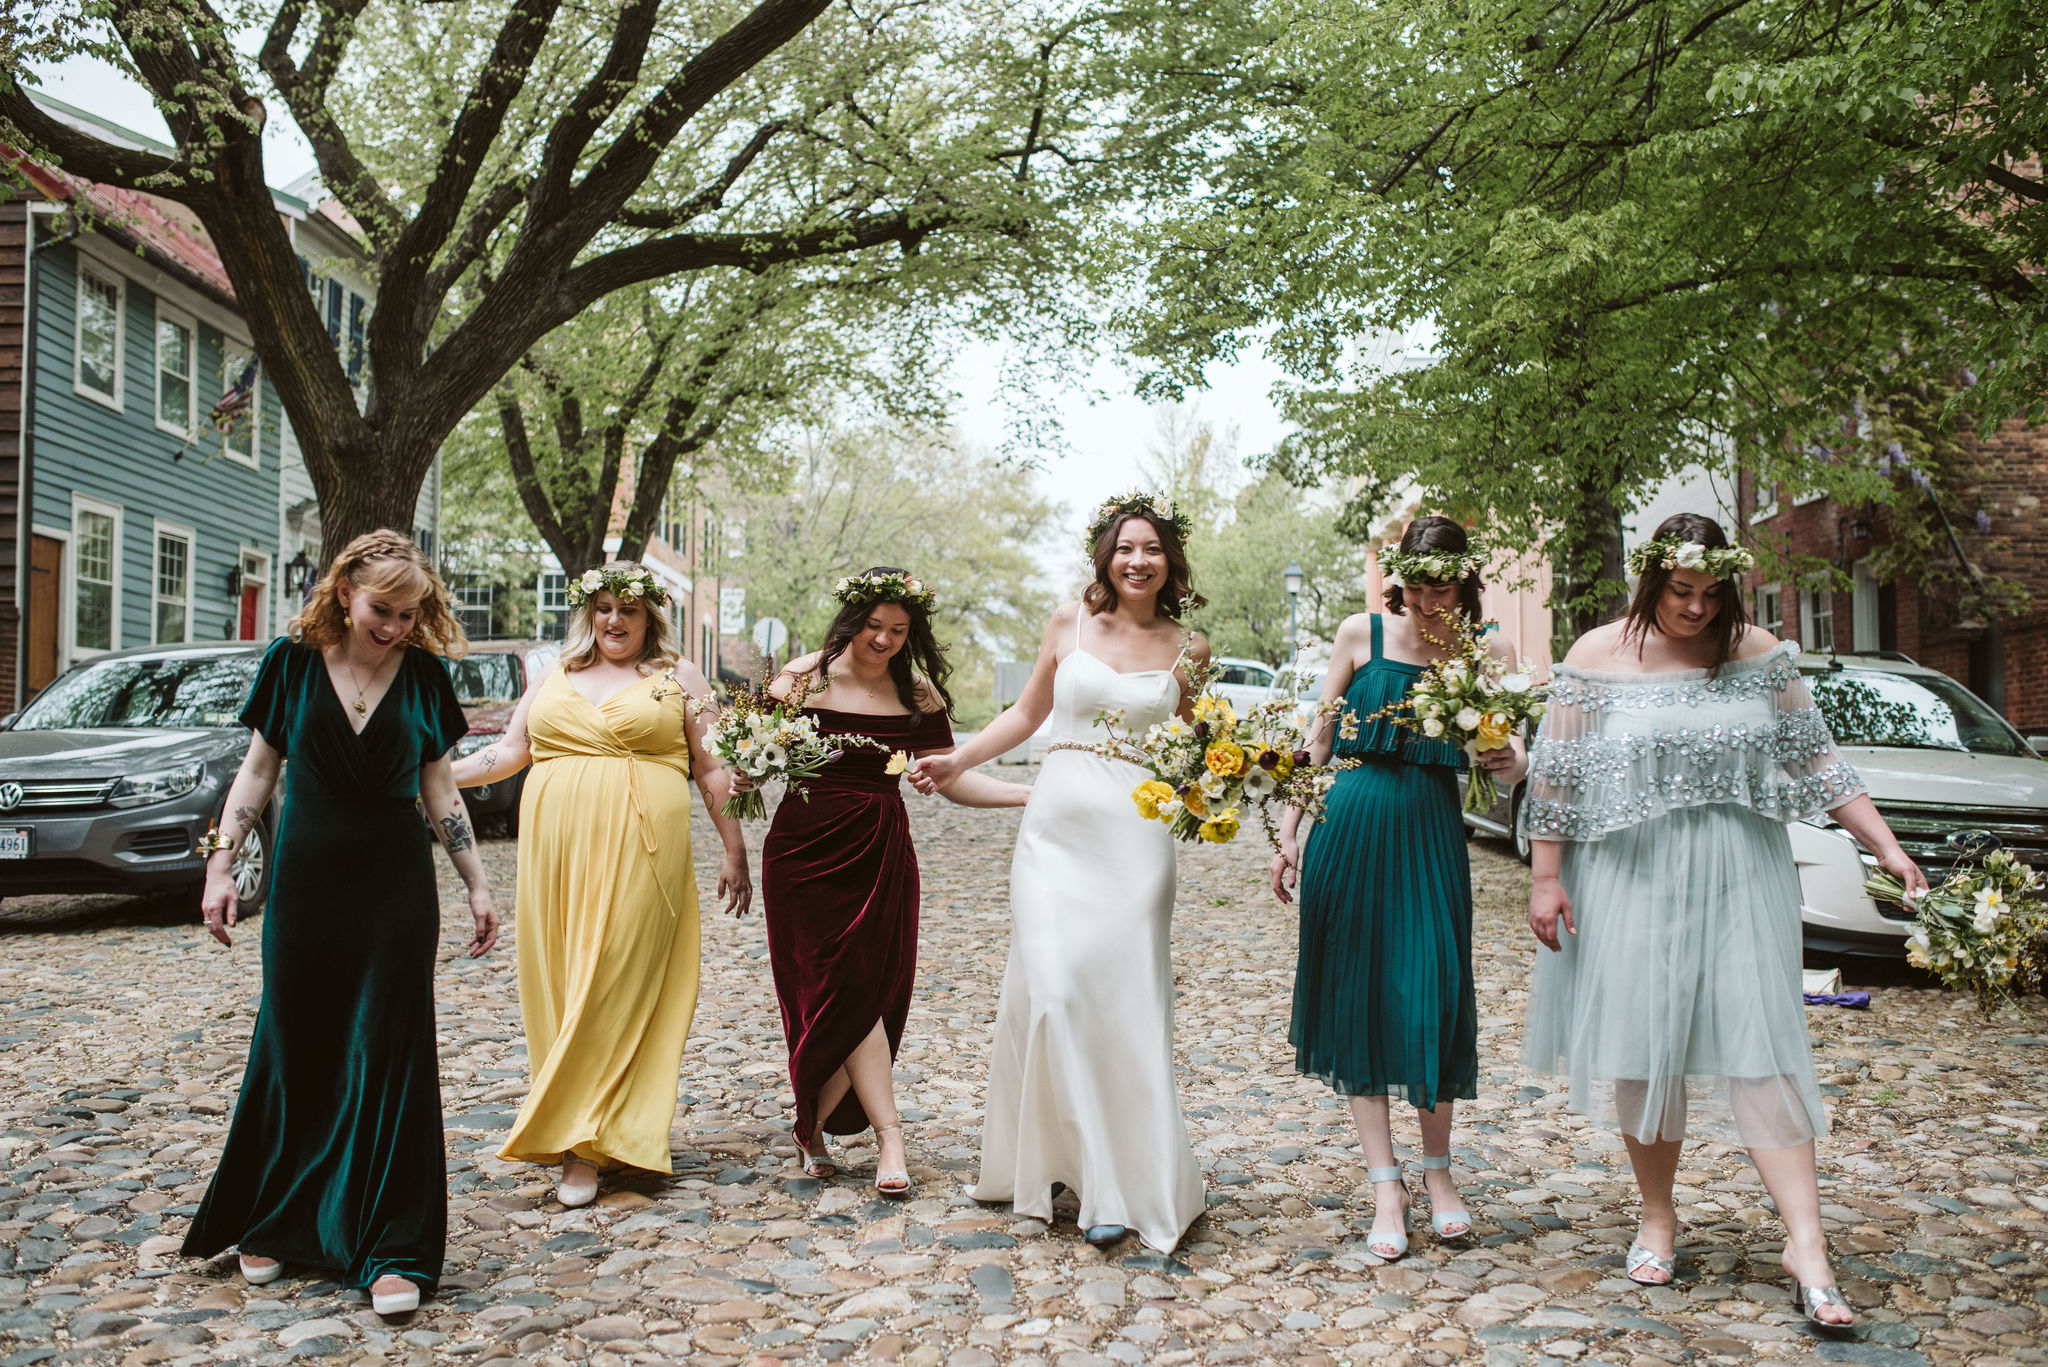  Washington DC, Baltimore Wedding Photographer, Alexandria, Old Town, Jewel Tone, Romantic, Modern, Bride and bridesmaids walking together on cobblestone street, Mismatched bridesmaid dresses, Sungold Flower Co 